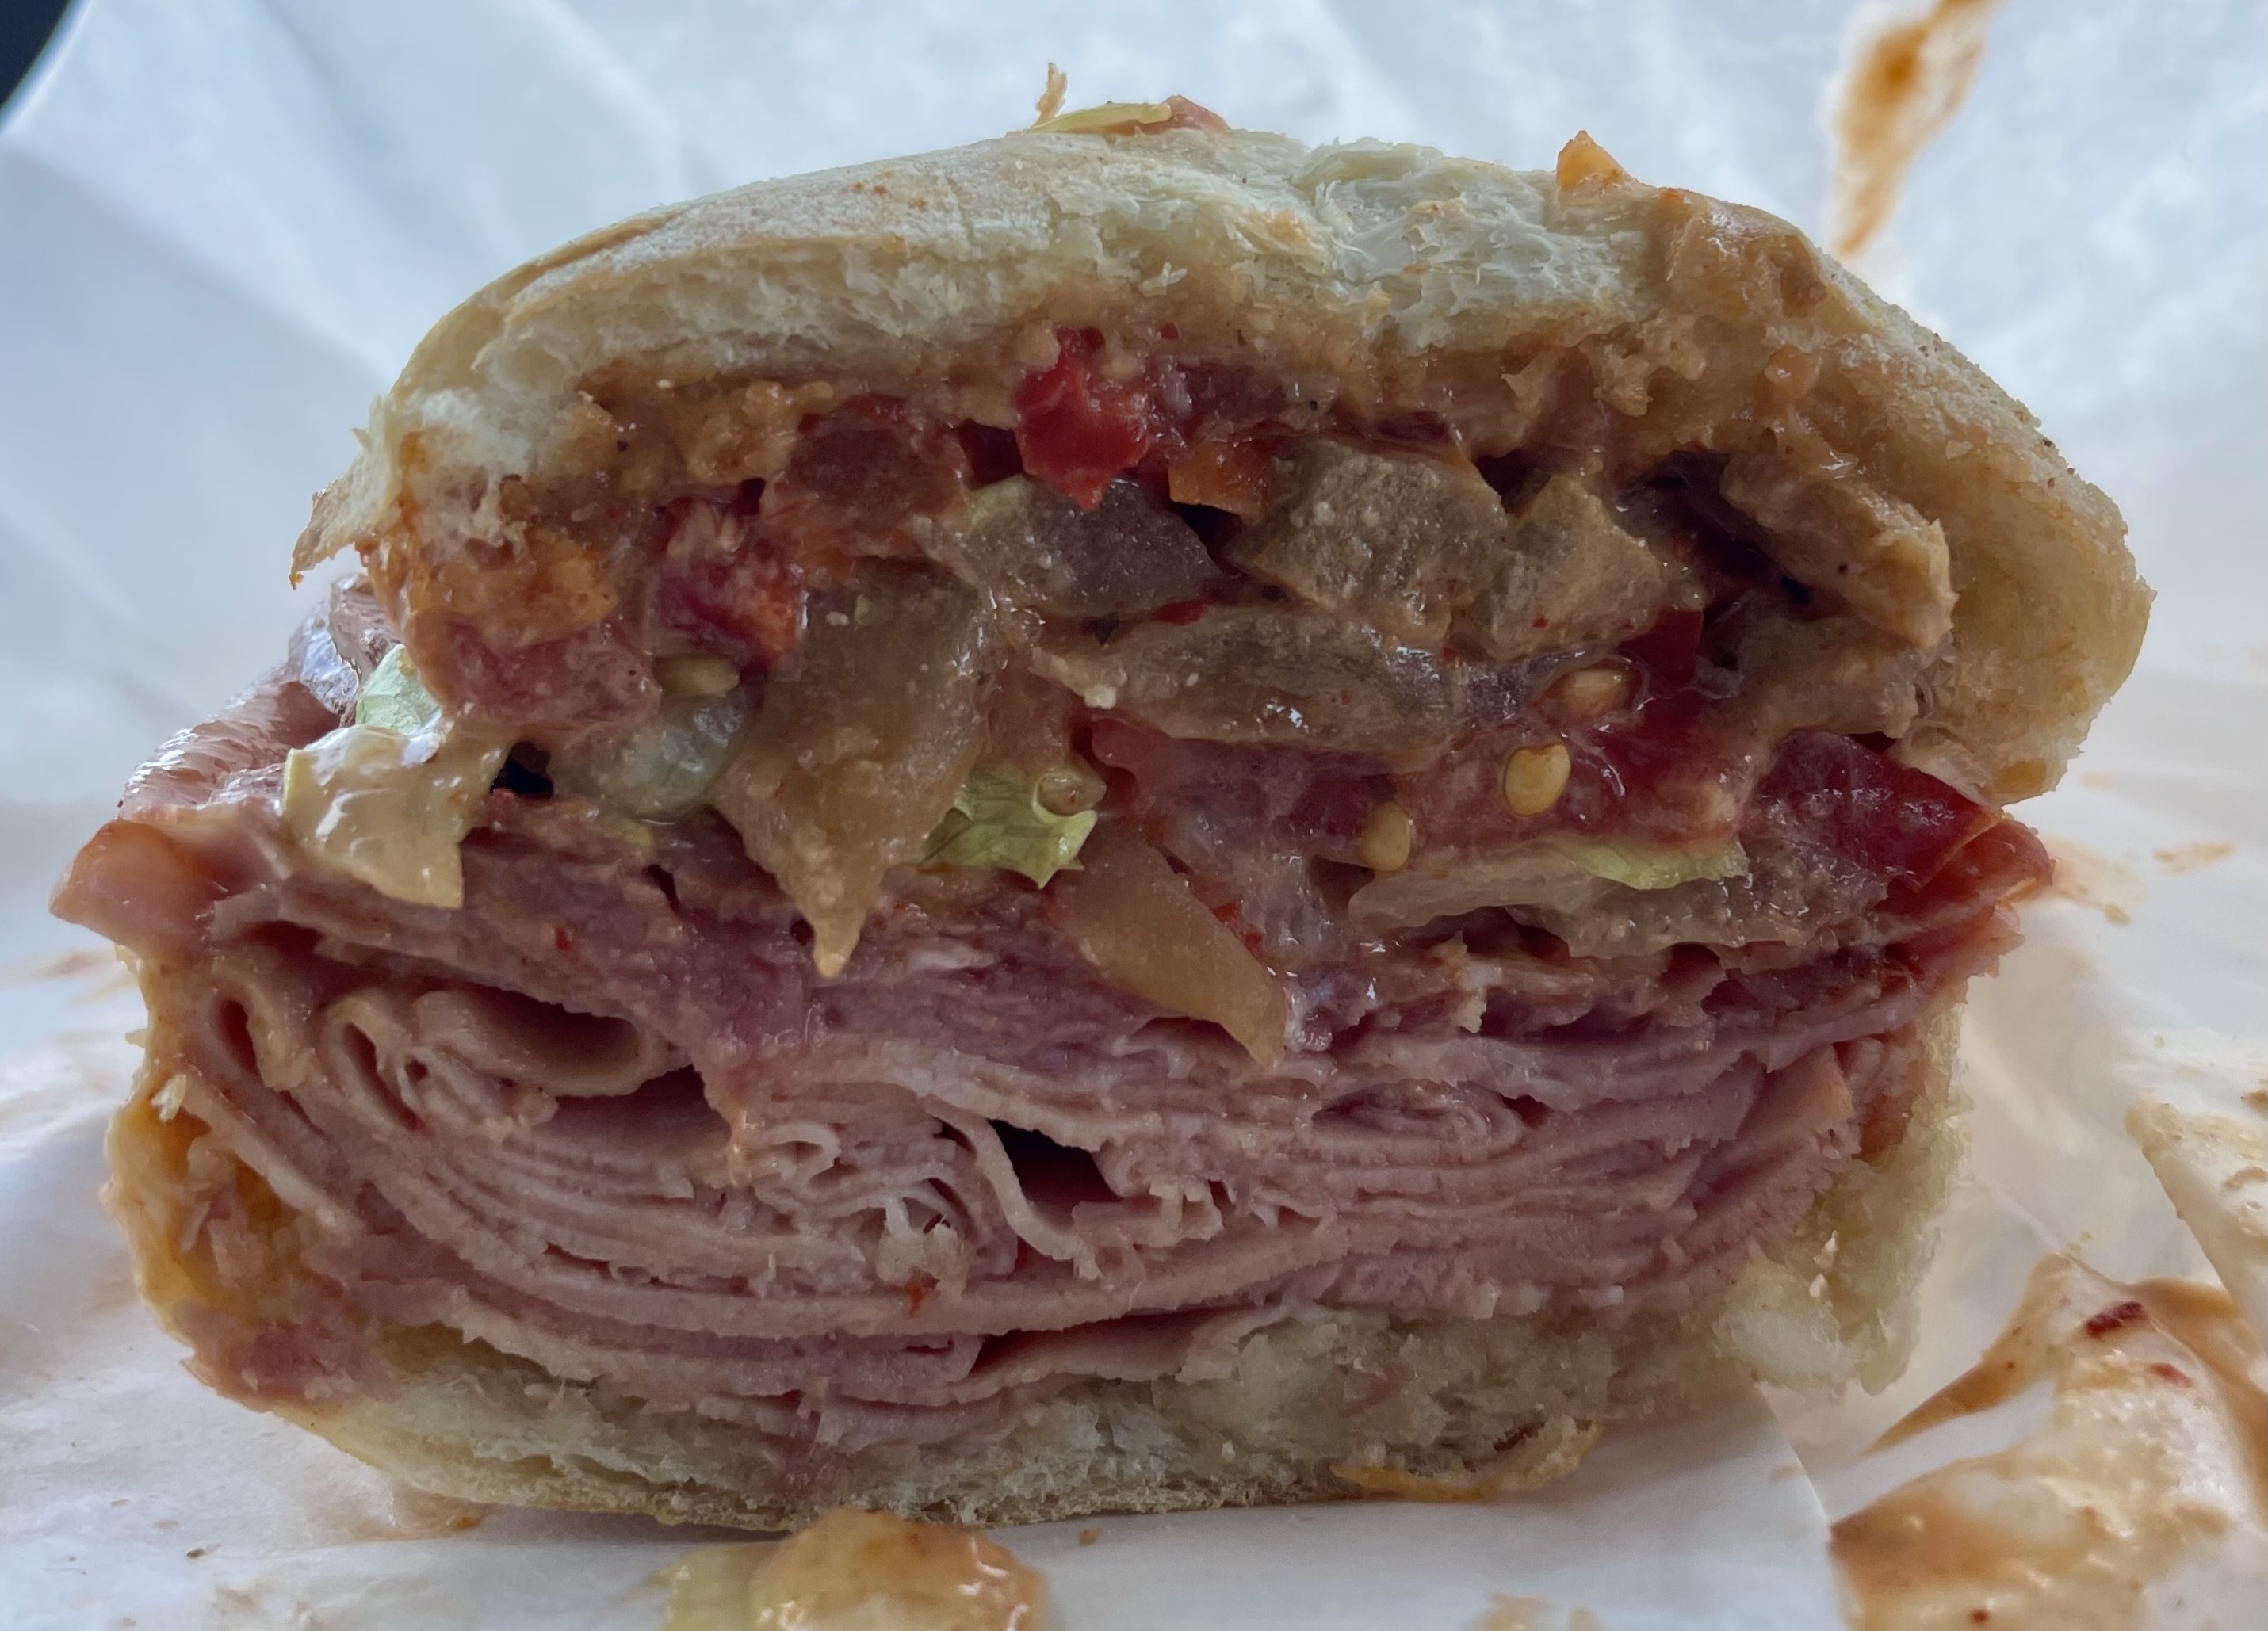 With a generous portions of prosciutto, mortadella, capocollo, cheese, tomatoes, lettuce, roasted red peppers, pickled eggplant and chipotle, Roberto's Italian Trio is one of the most popular sandwiches on the menu